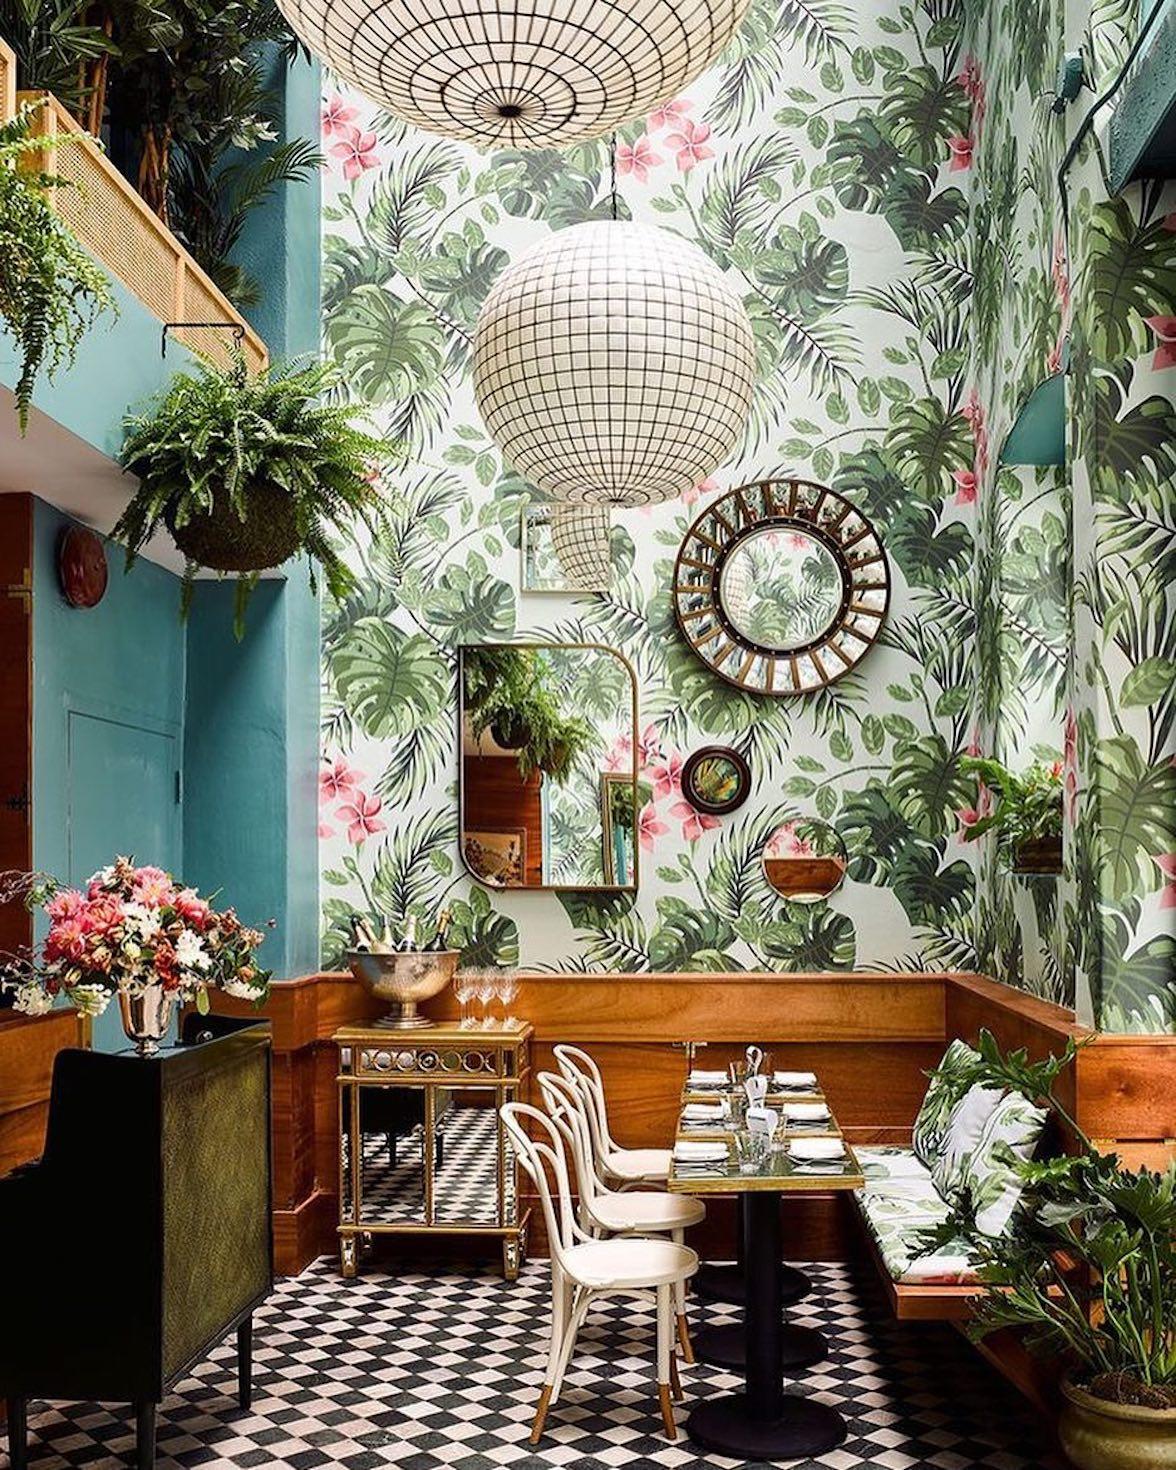 25 Restaurants & Hotels With The Most Beautiful Wallpaper